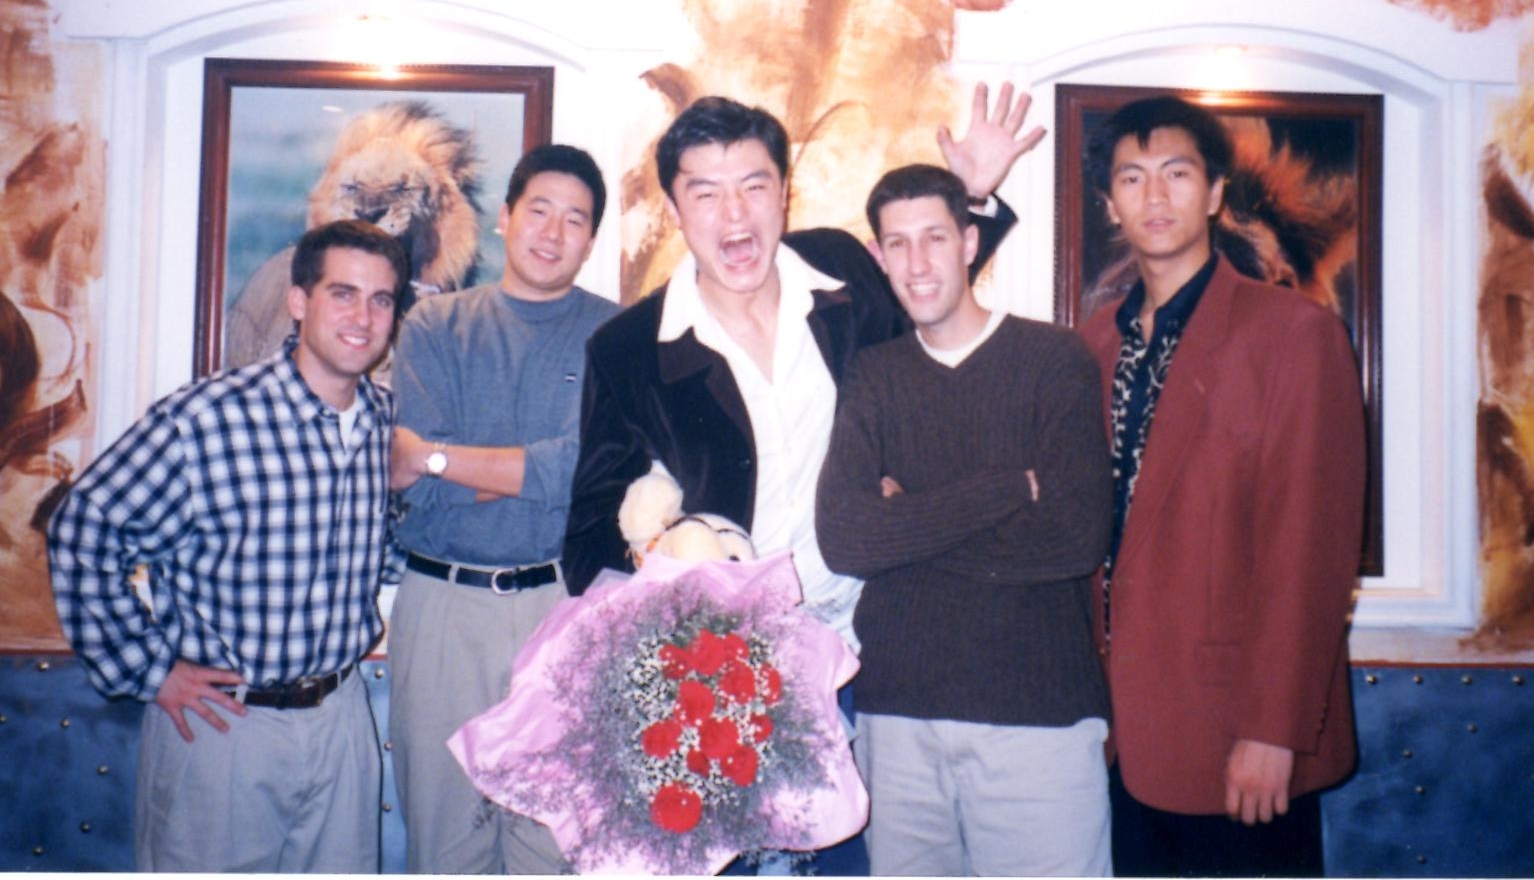 John Gunter and some of the Asian basketball players